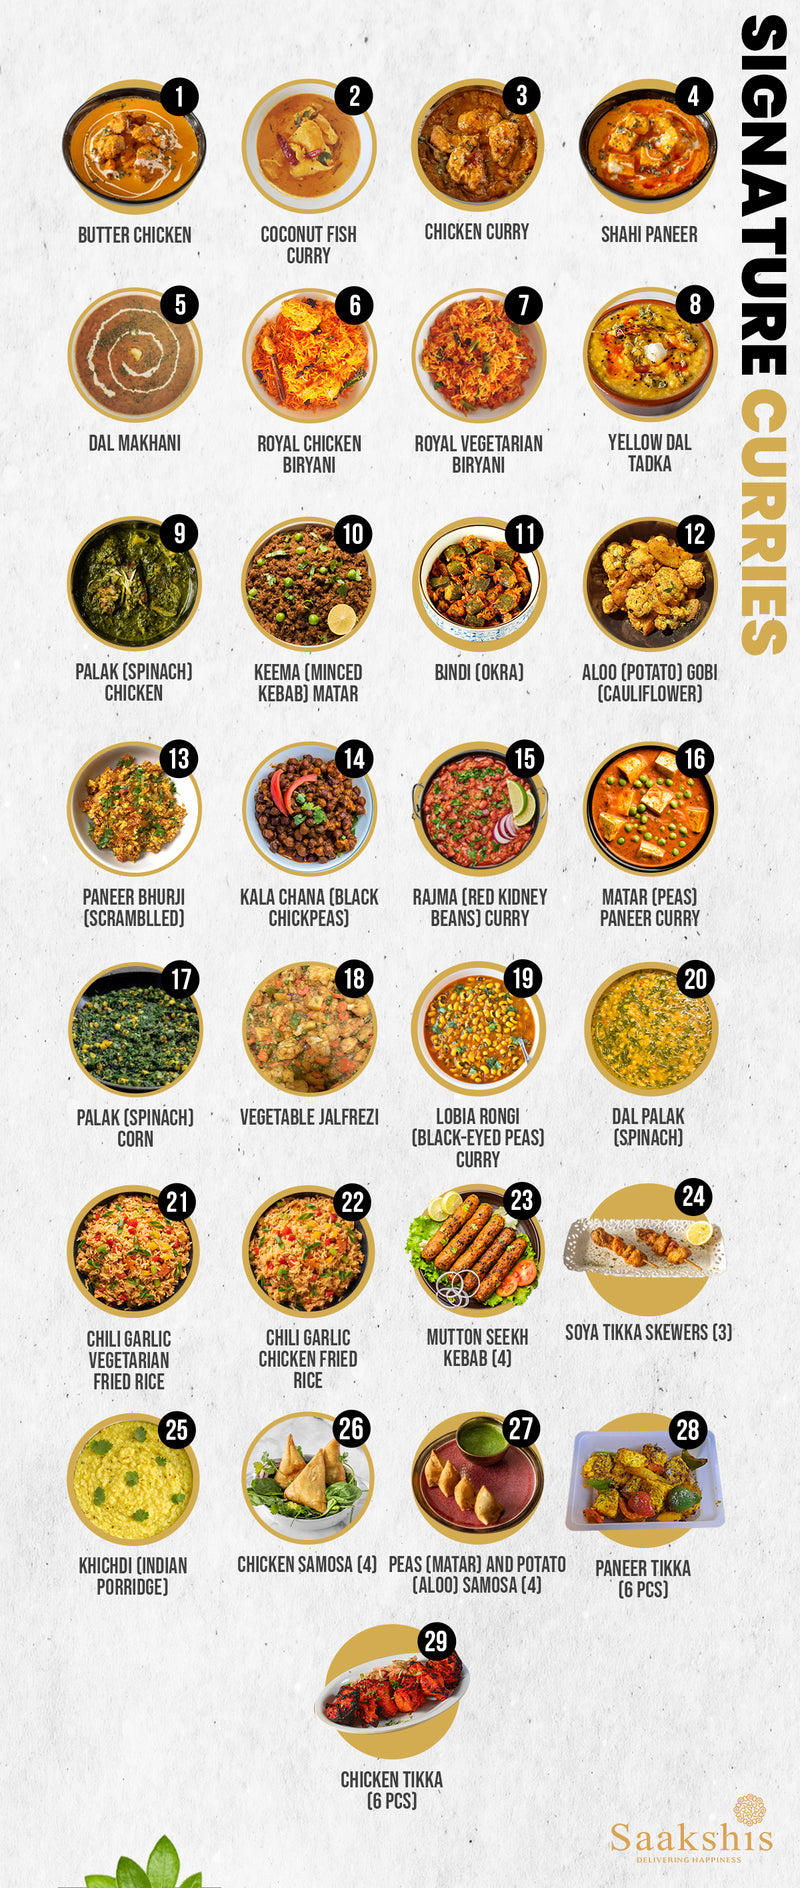 SIGNATURE CURRIES MIX & MATCH 6 WEEKLY MEALS PLAN